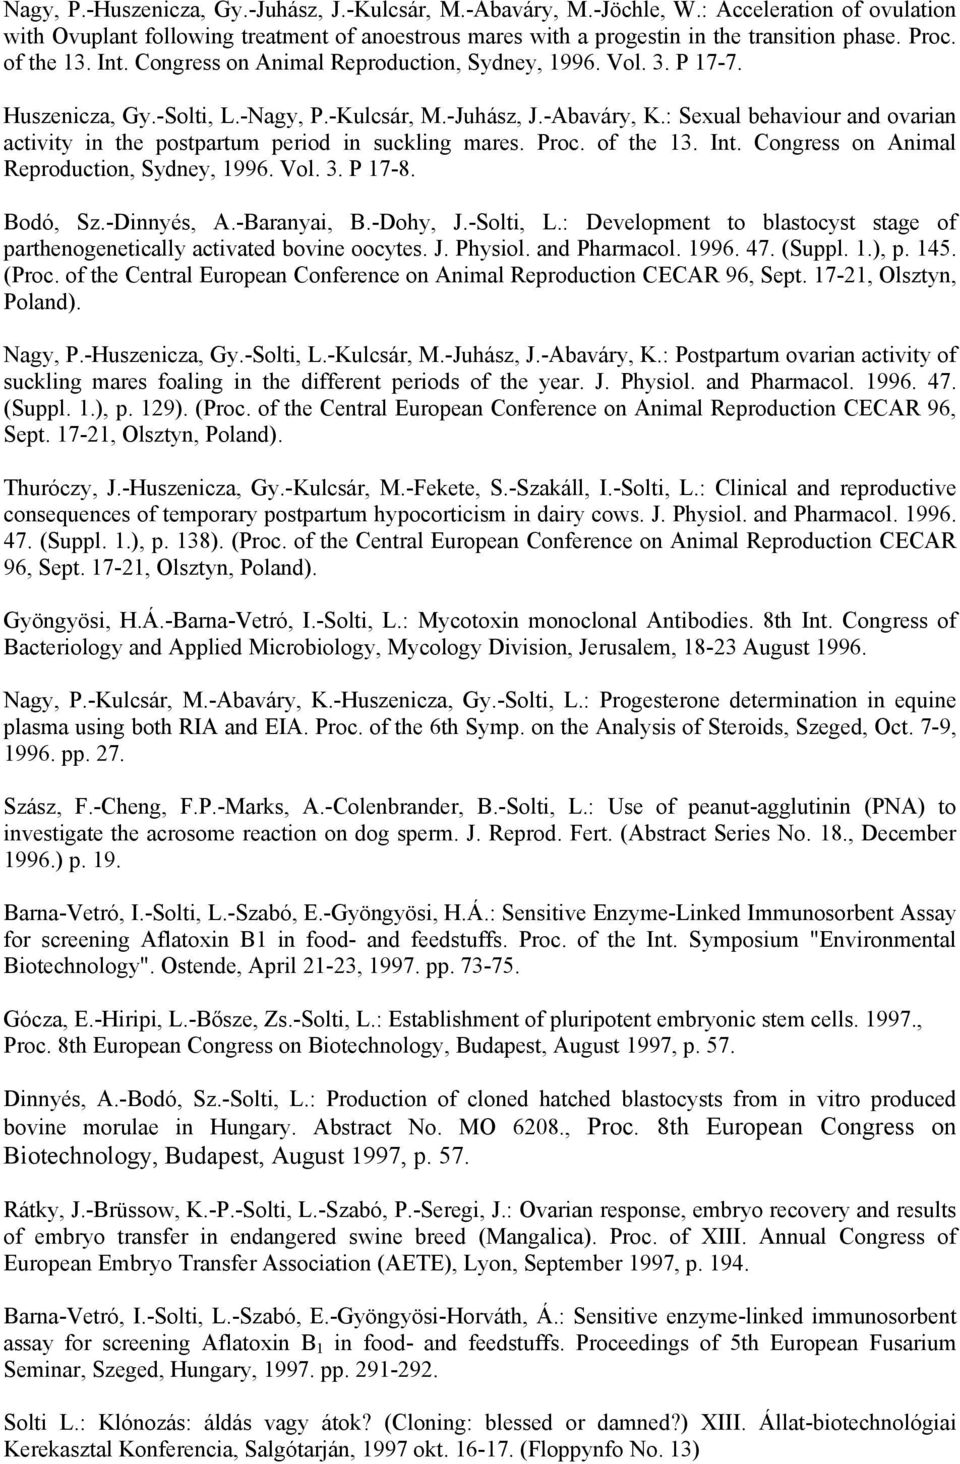 : Sexual behaviour and ovarian activity in the postpartum period in suckling mares. Proc. of the 13. Int. Congress on Animal Reproduction, Sydney, 1996. Vol. 3. P 17-8. Bodó, Sz.-Dinnyés, A.